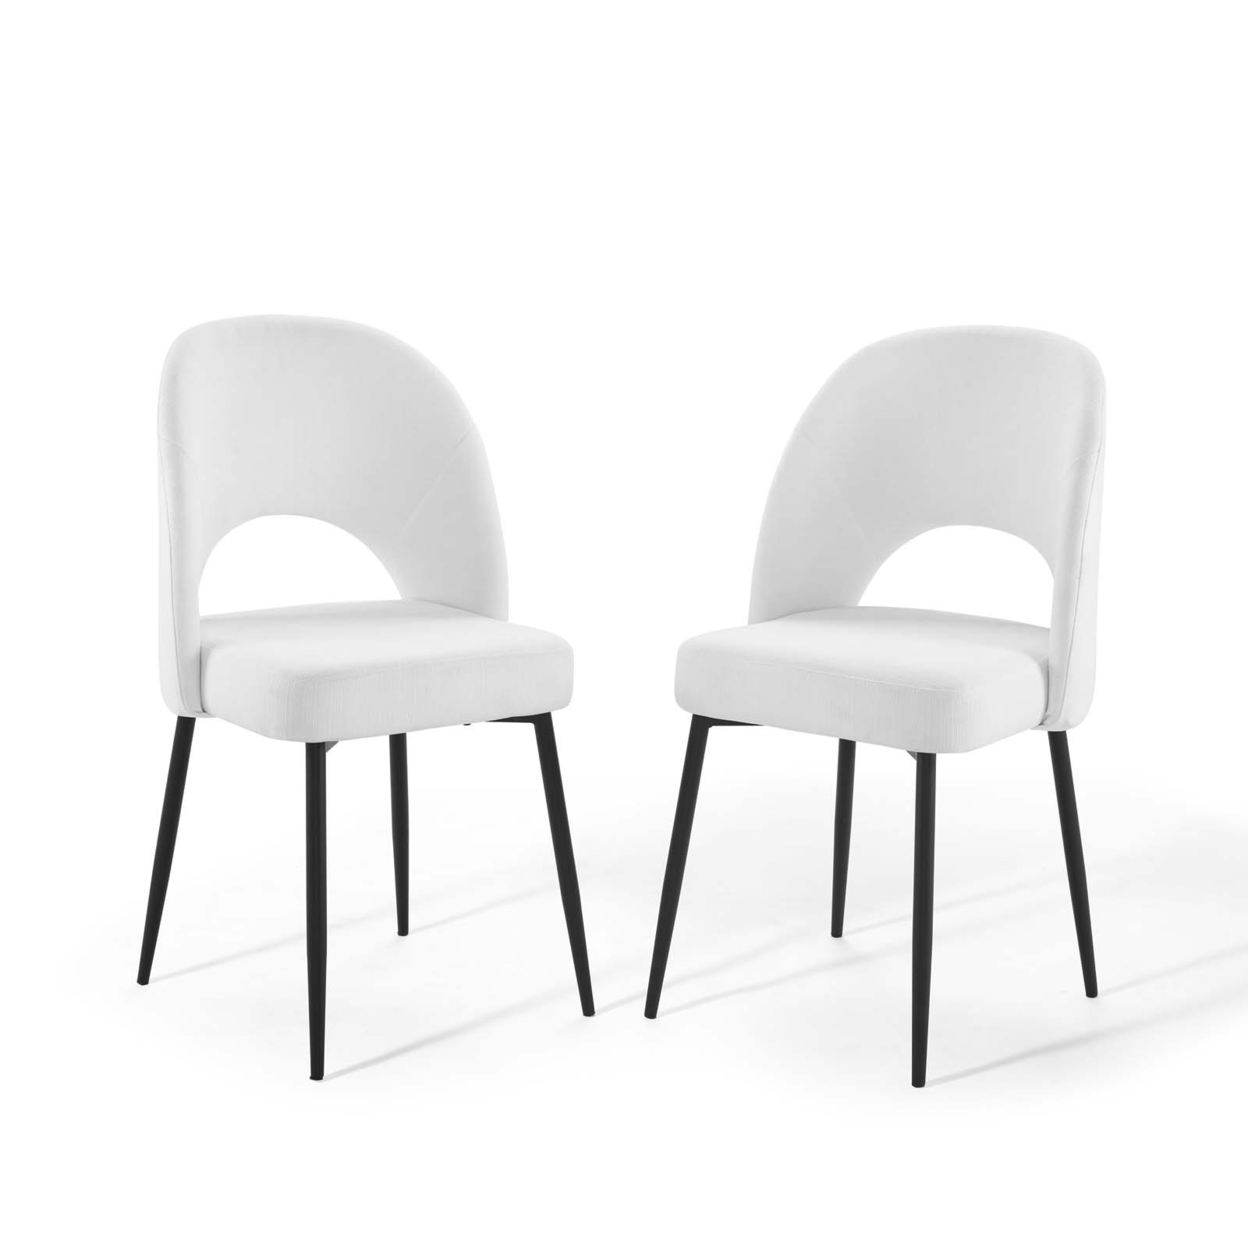 Rouse Dining Side Chair Upholstered Fabric Set Of 2, Black White